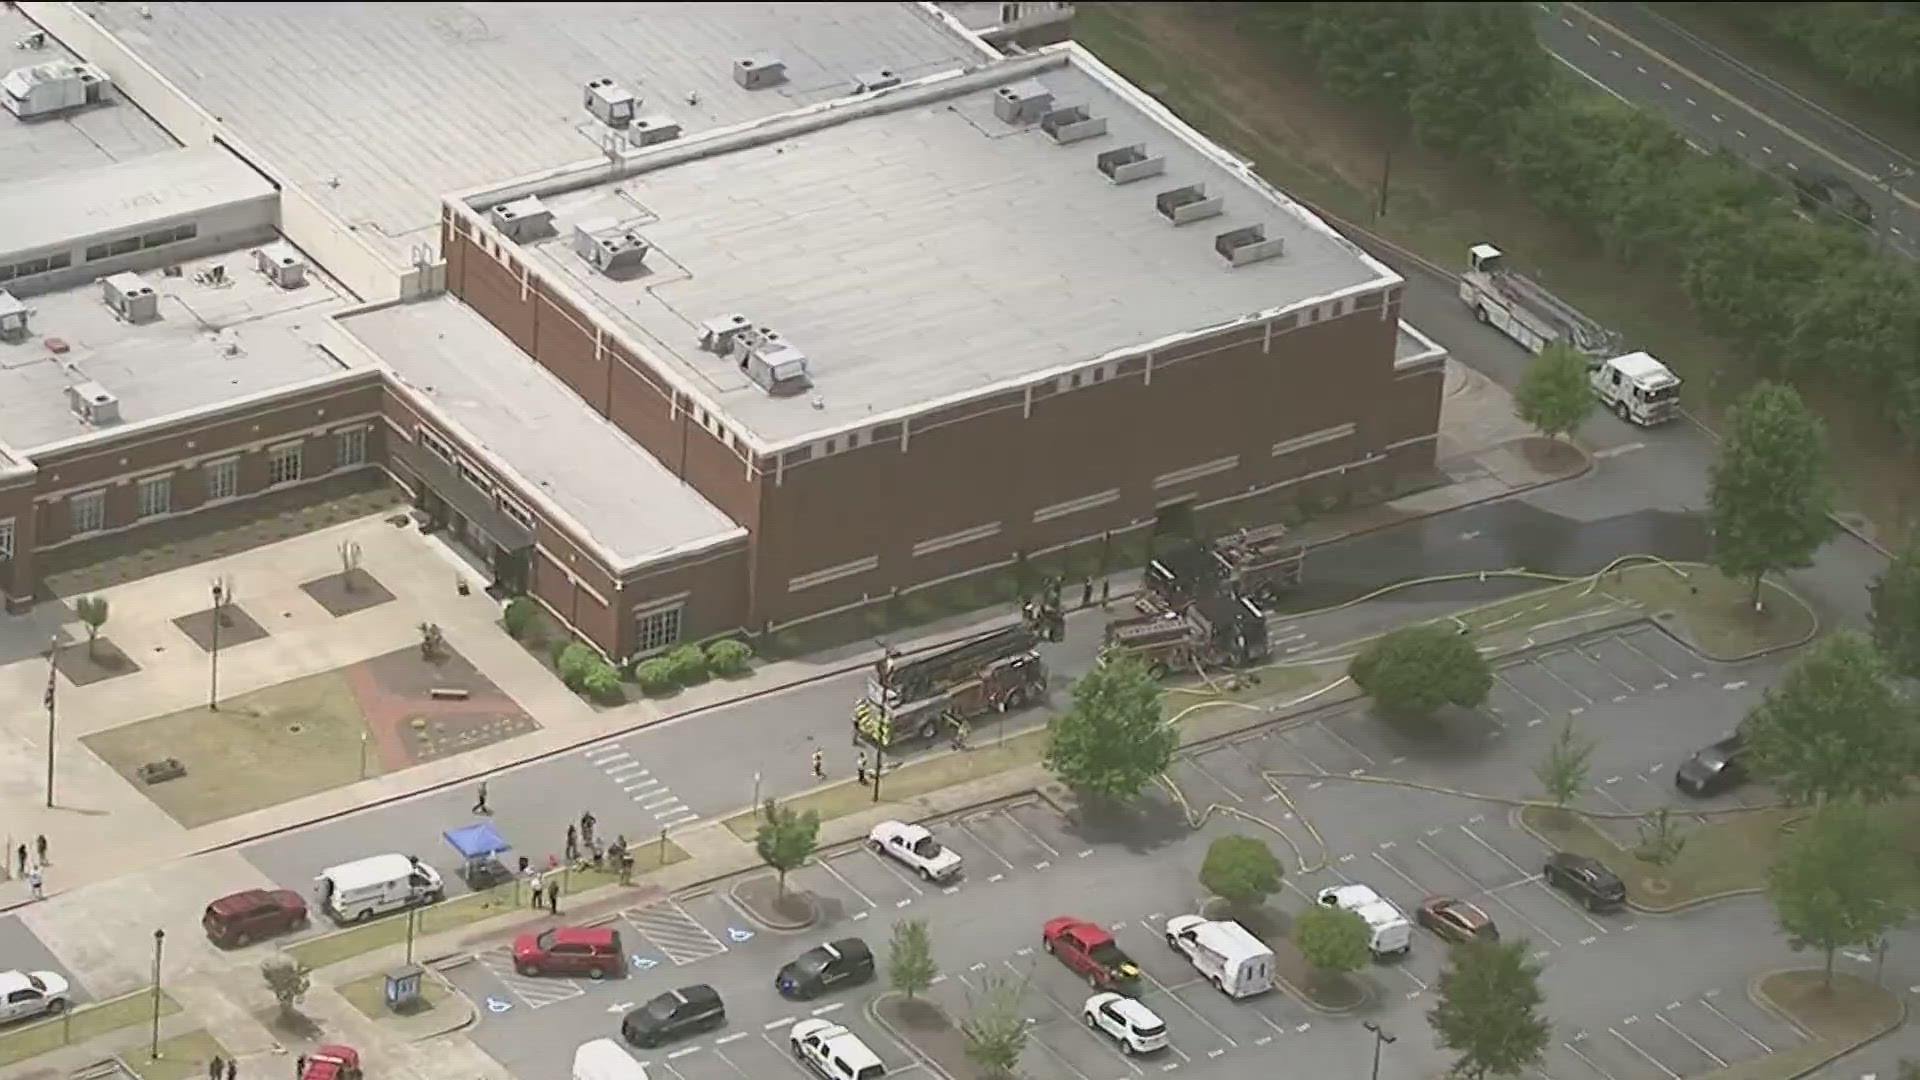 Crews were called to Cambridge High School auditorium Monday after the fire triggered the sprinkler system, according to district officials.